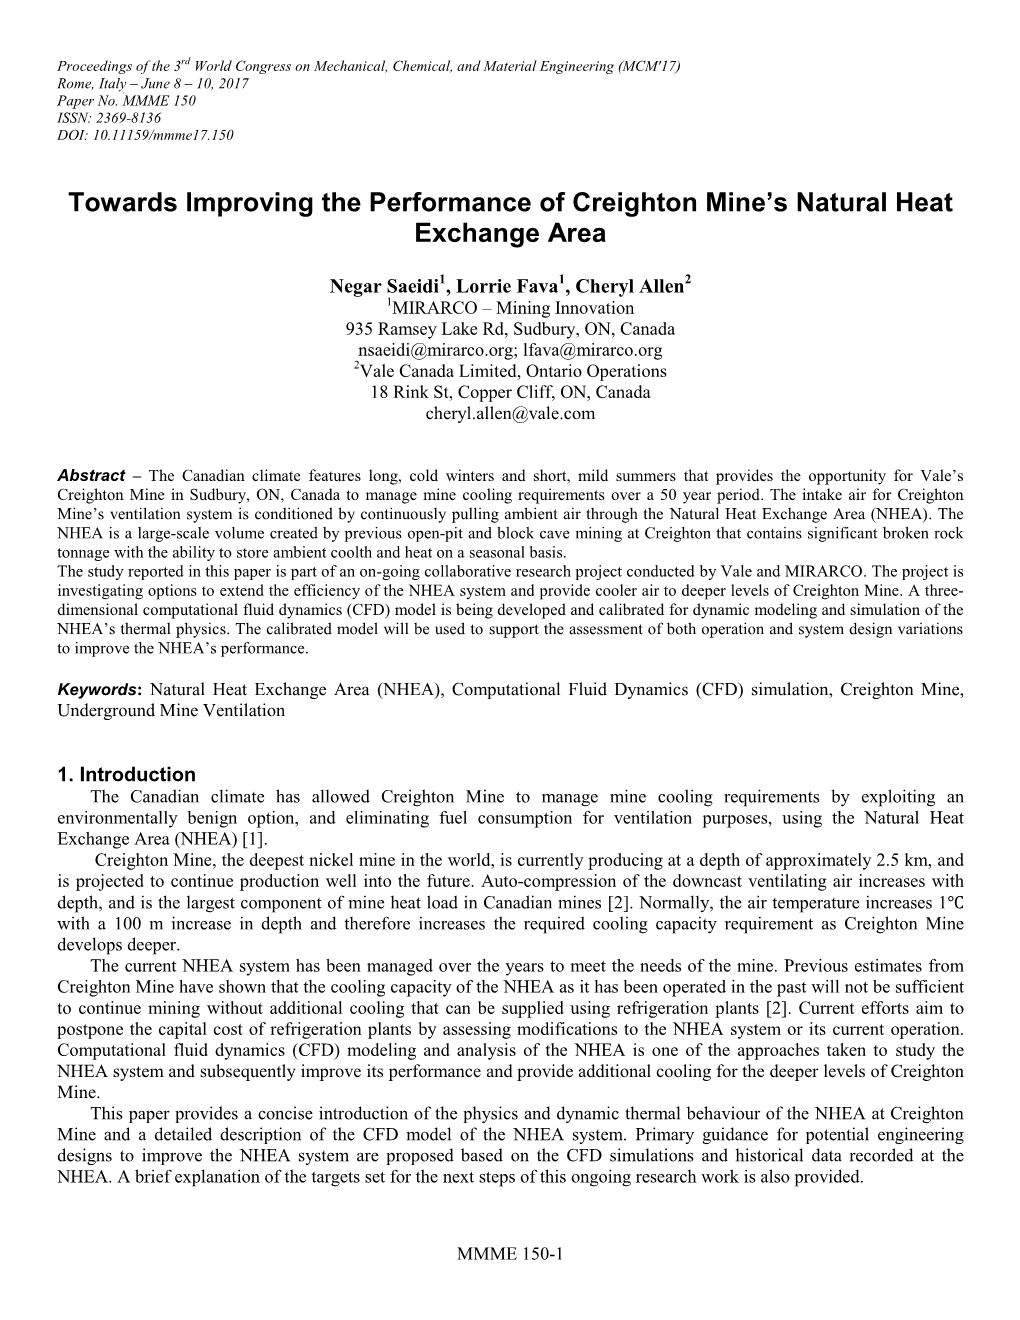 Towards Improving the Performance of Creighton Mine's Natural Heat